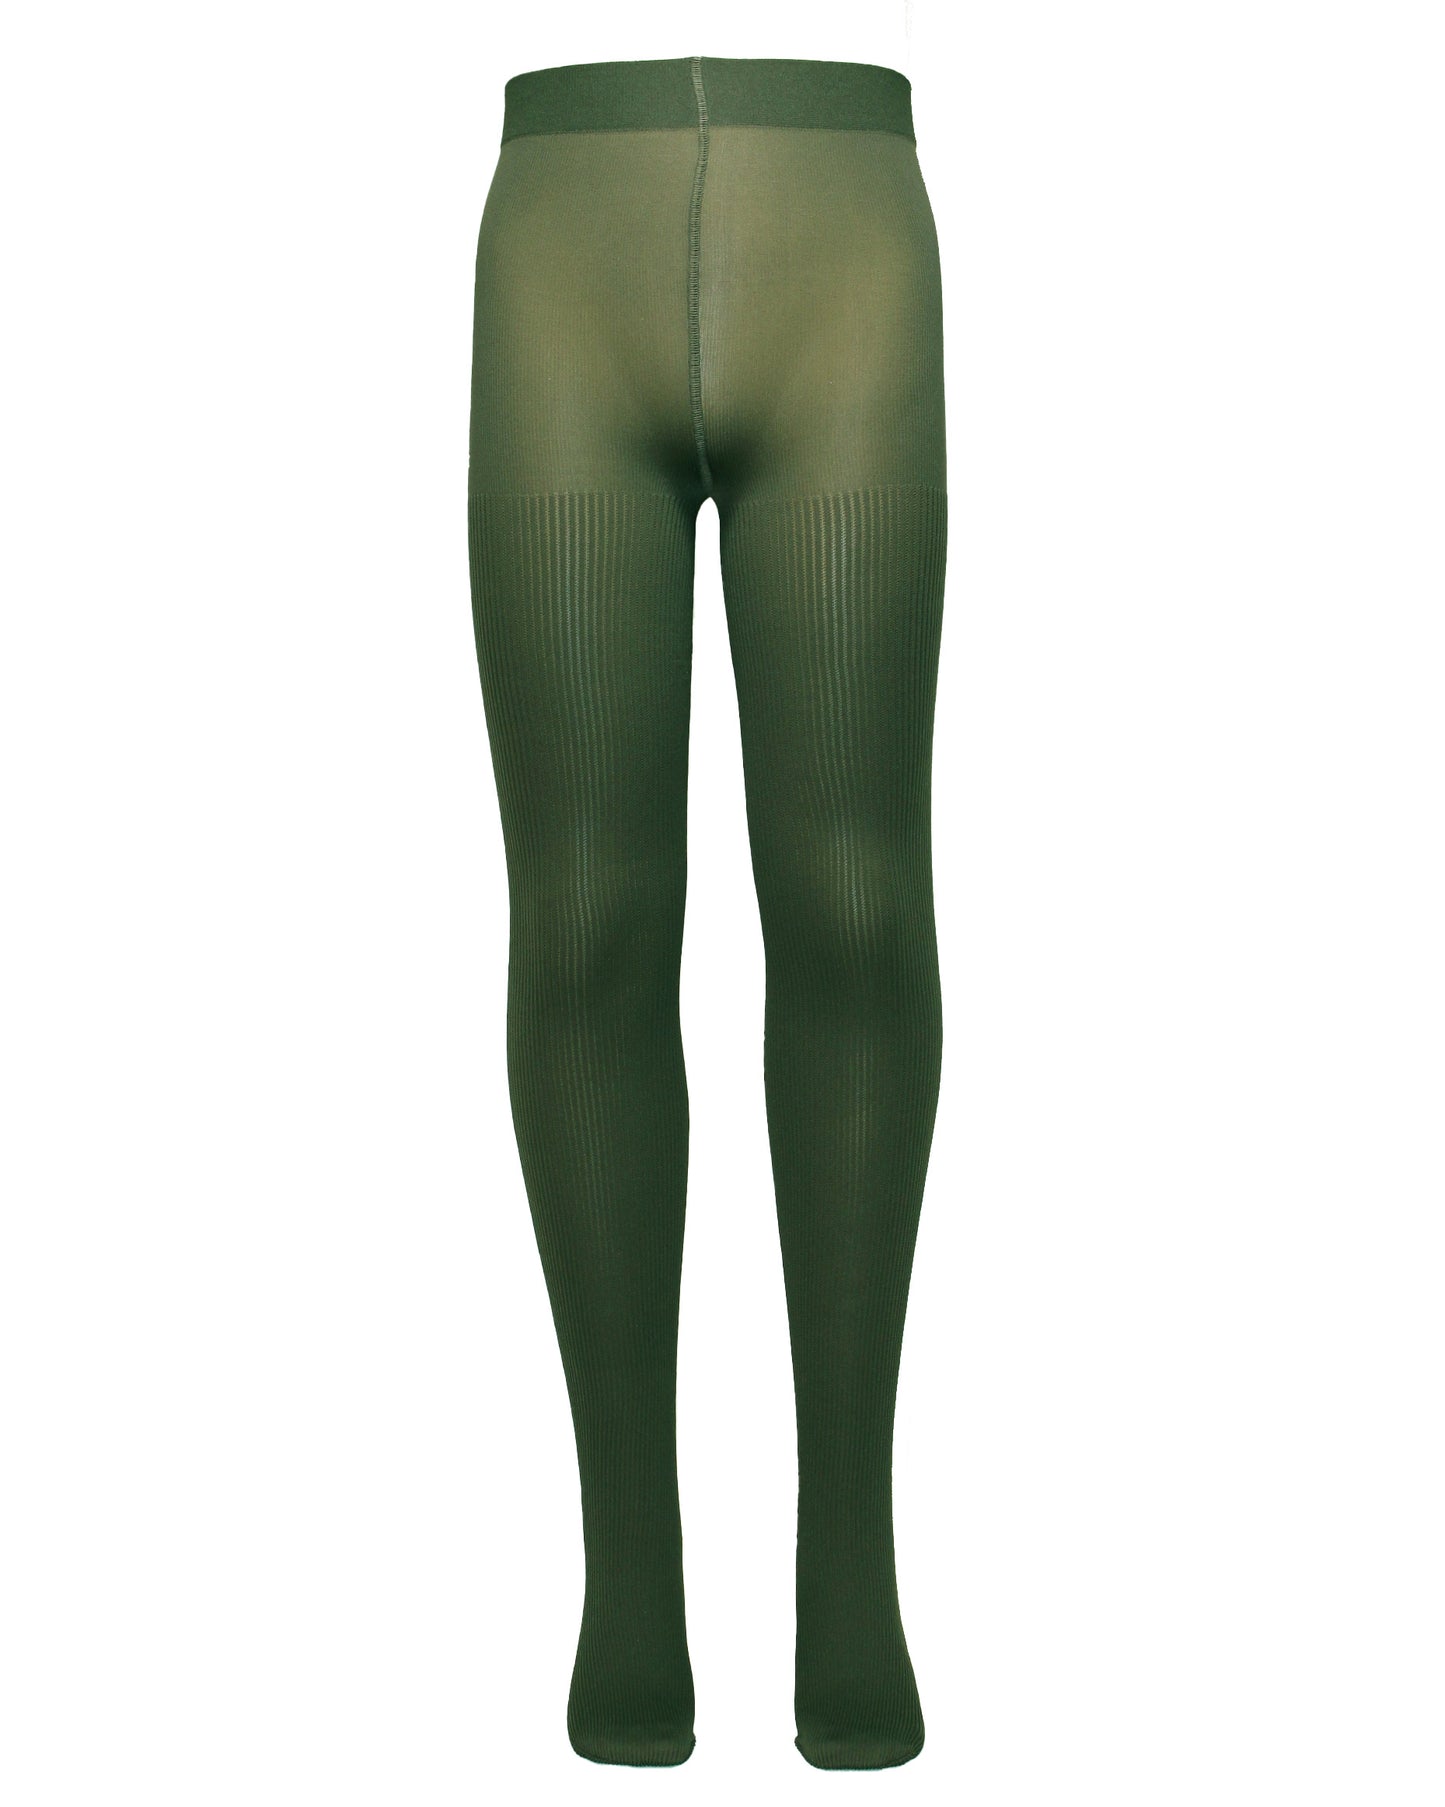 Omsa Serenella Cinderella Collant - Dark bottle green soft opaque ribbed children's tights with a plain smooth boxer top and deep comfort waist band.